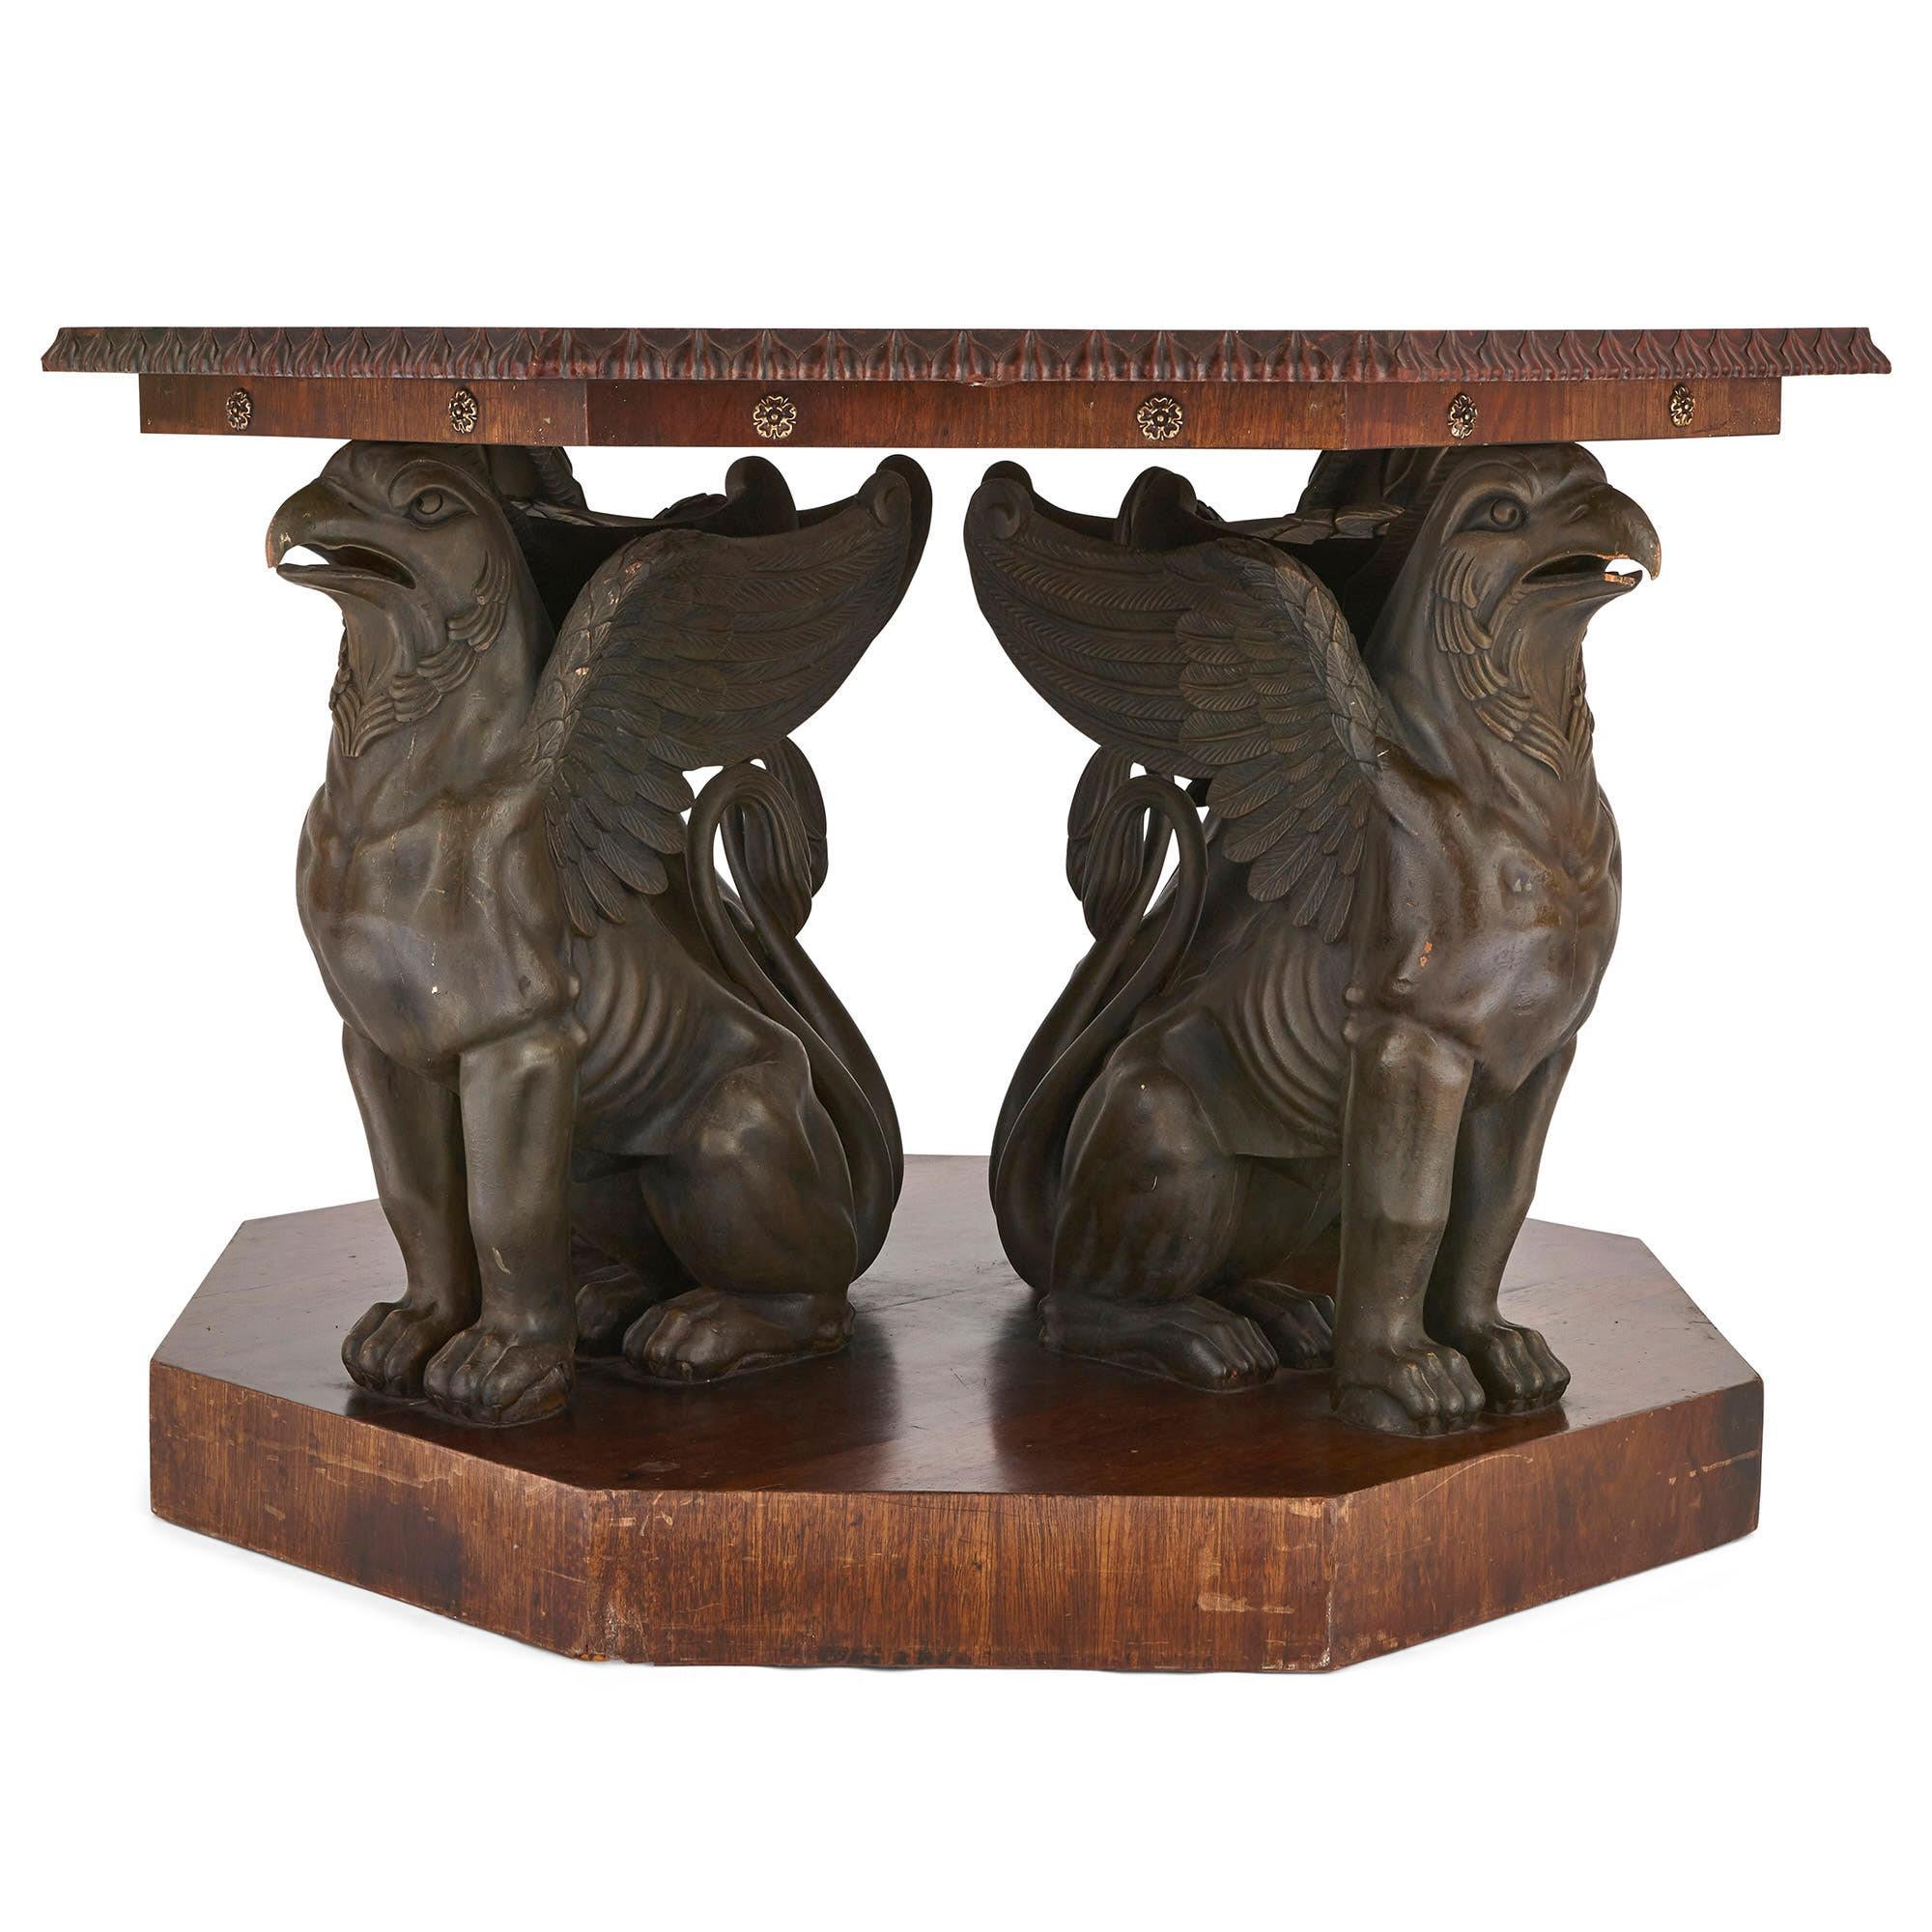 The octagonal top of this table, of solid mahogany, sits above an octagonal frieze, decorated with rosettes, which in turn is supported by four bronzed metal seated griffins. The griffins sit upon a solid mahogany octagonal plinth base. The design